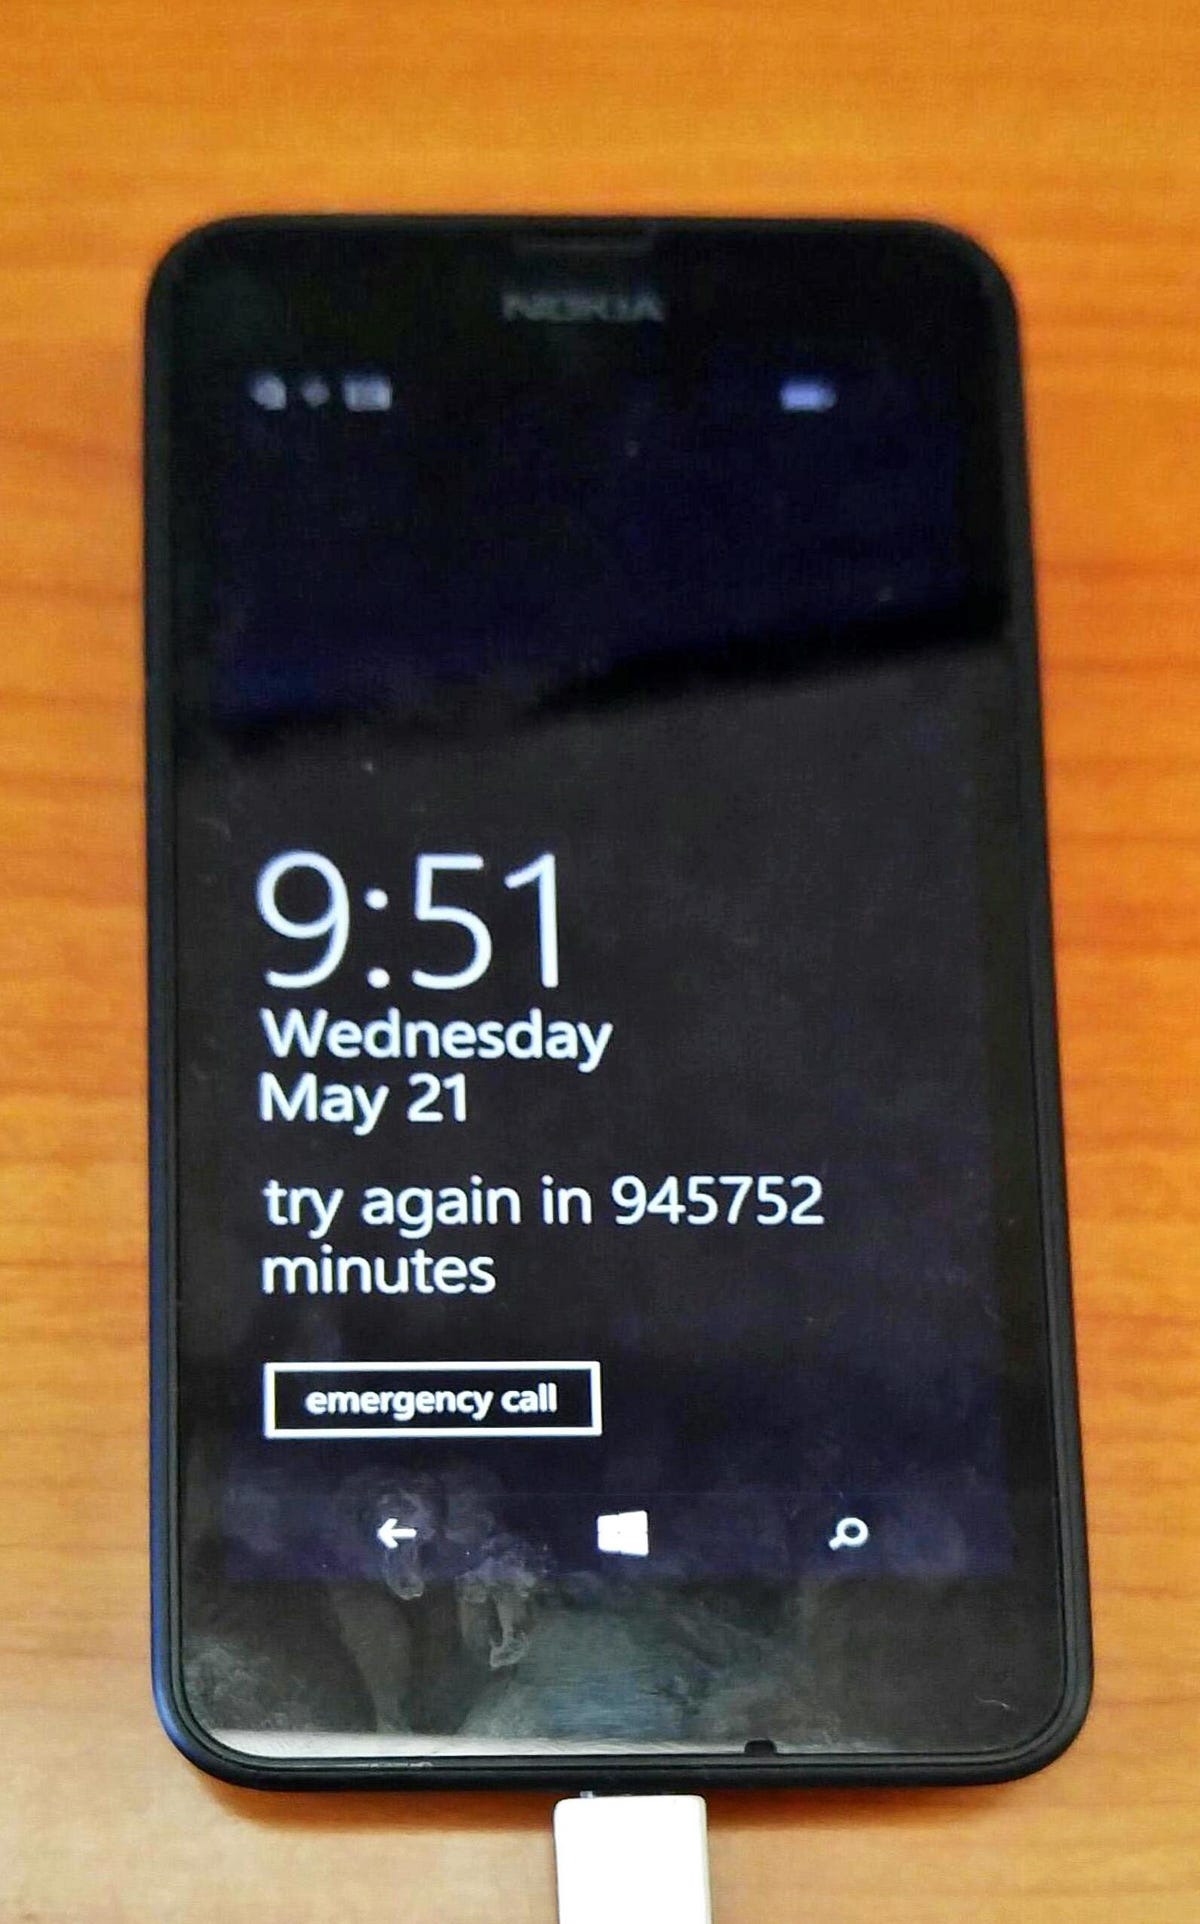 Windows phone is locked: try again in 945752 minutes. | by jiachun guo |  Medium